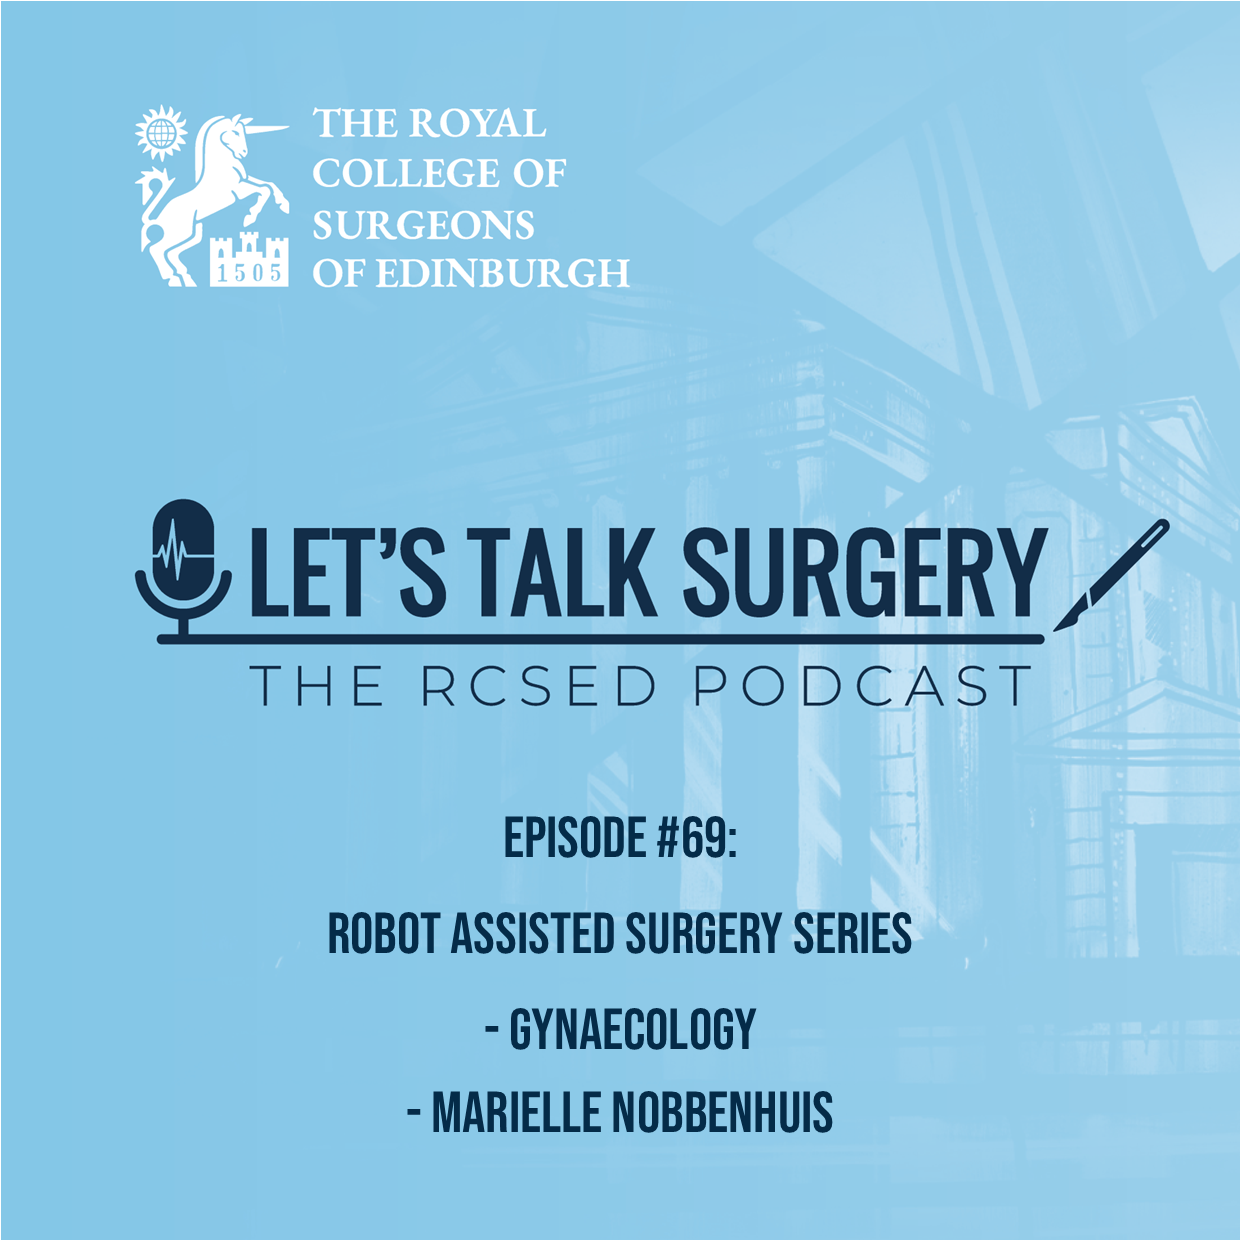 Robot Assisted Surgery Series – Gynaecology – Marielle Nobbenhuis